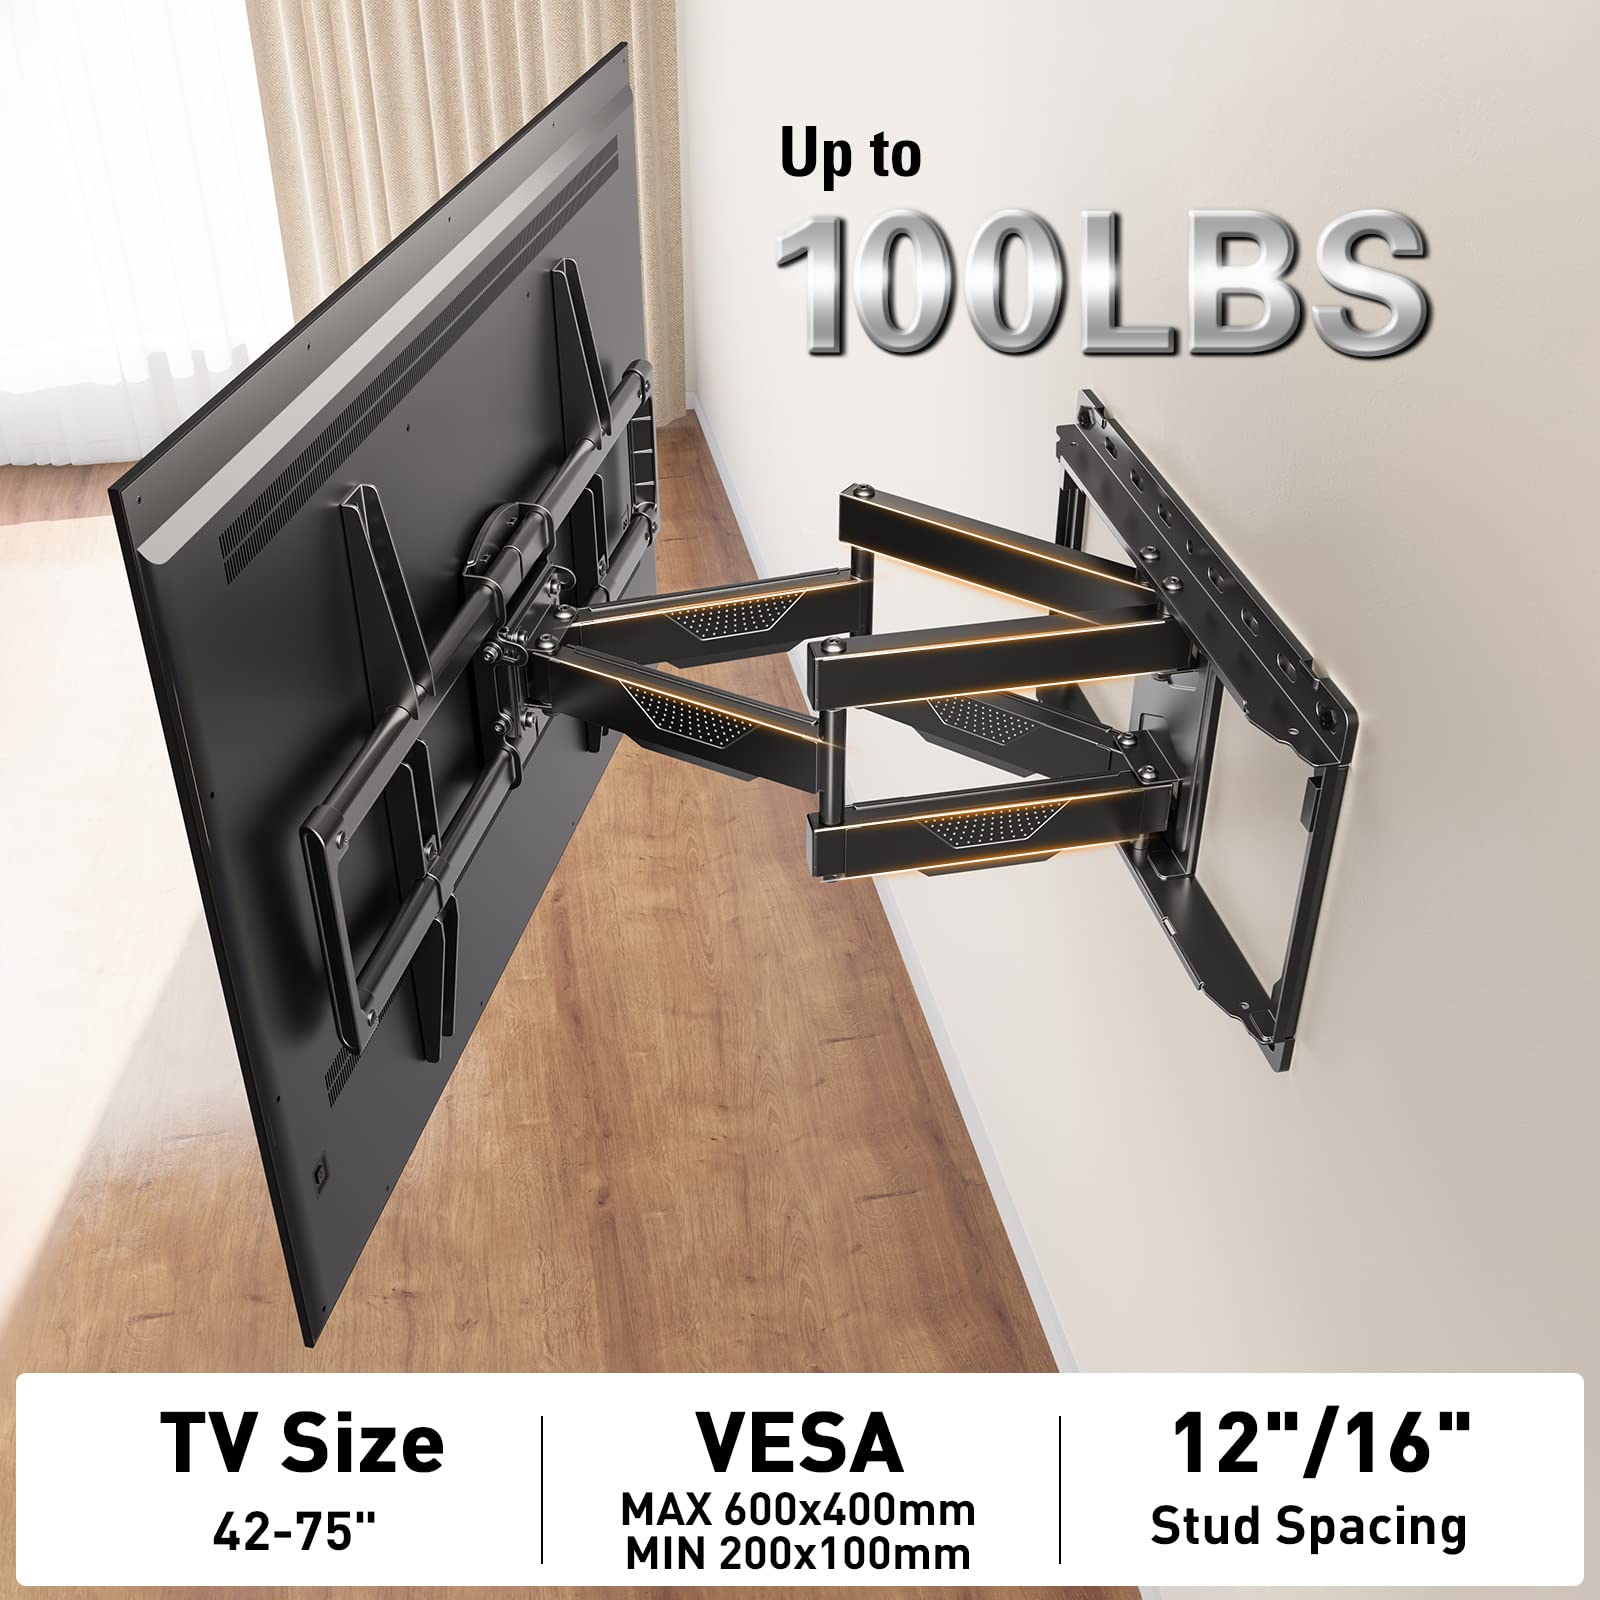 Mounting Dream Full Motion TV Wall Mount and Soundbar Bracket Bundle,TV Wall Mount with Sliding Design Max VESA 600x400mm and 100 LBS, Sound Bar Mount for Mounting Above or Under TV Up to 22 LBS